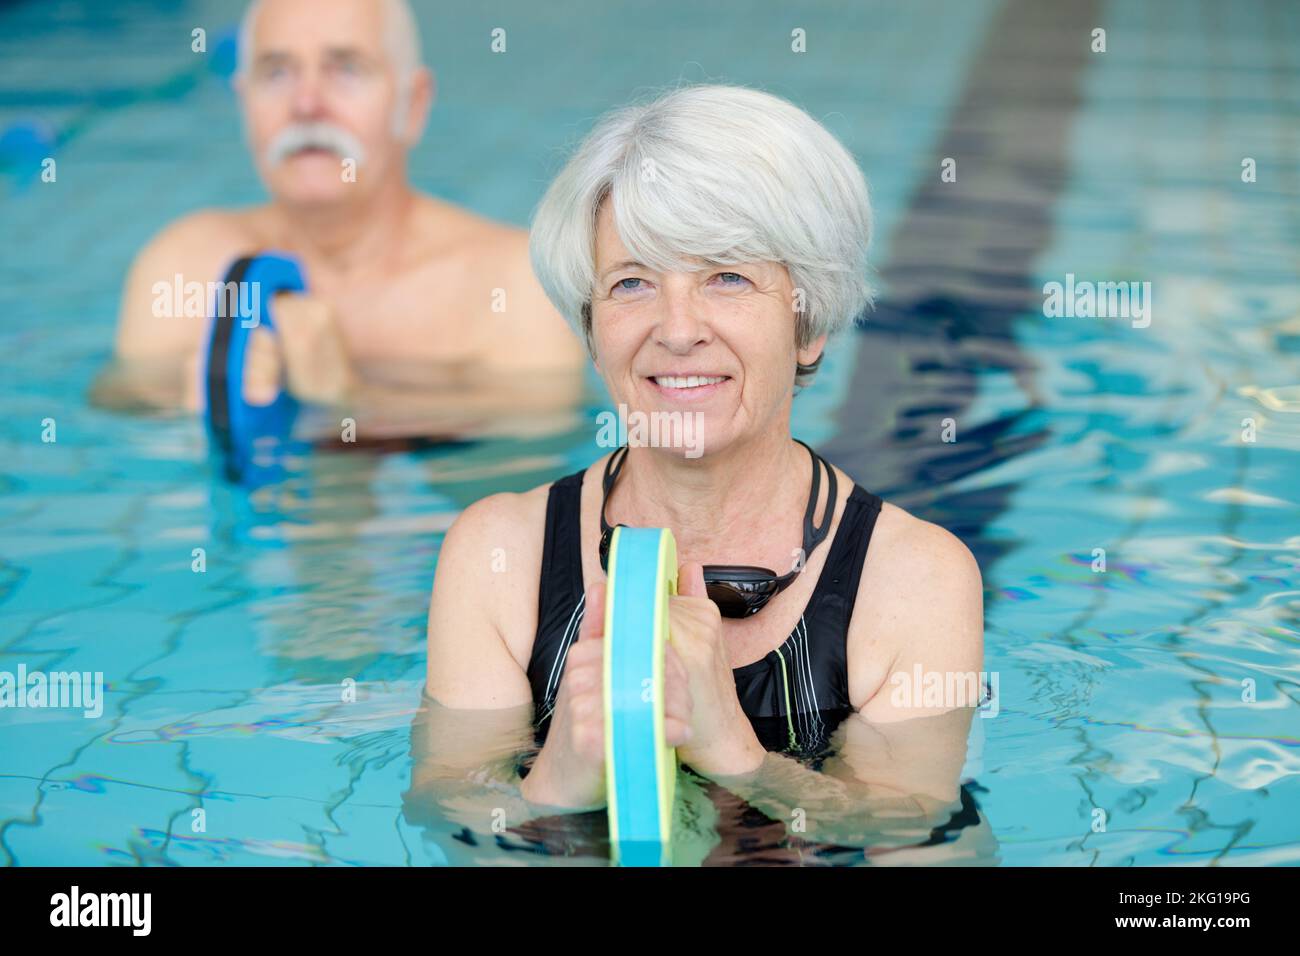 senior woman doing water exercise with kicking board Stock Photo